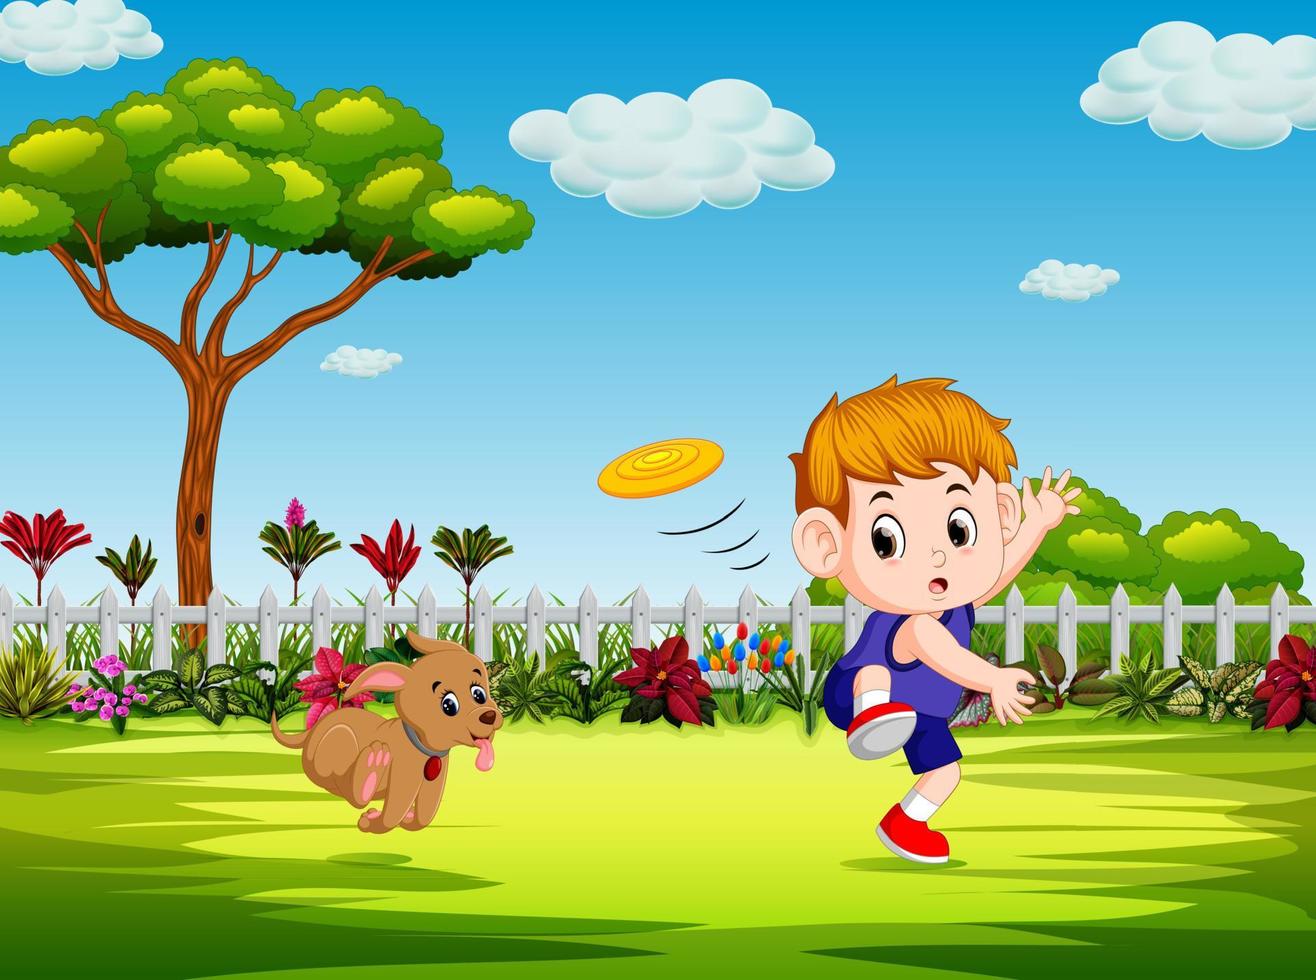 the boy are playing frisbee with his dog in the yard vector